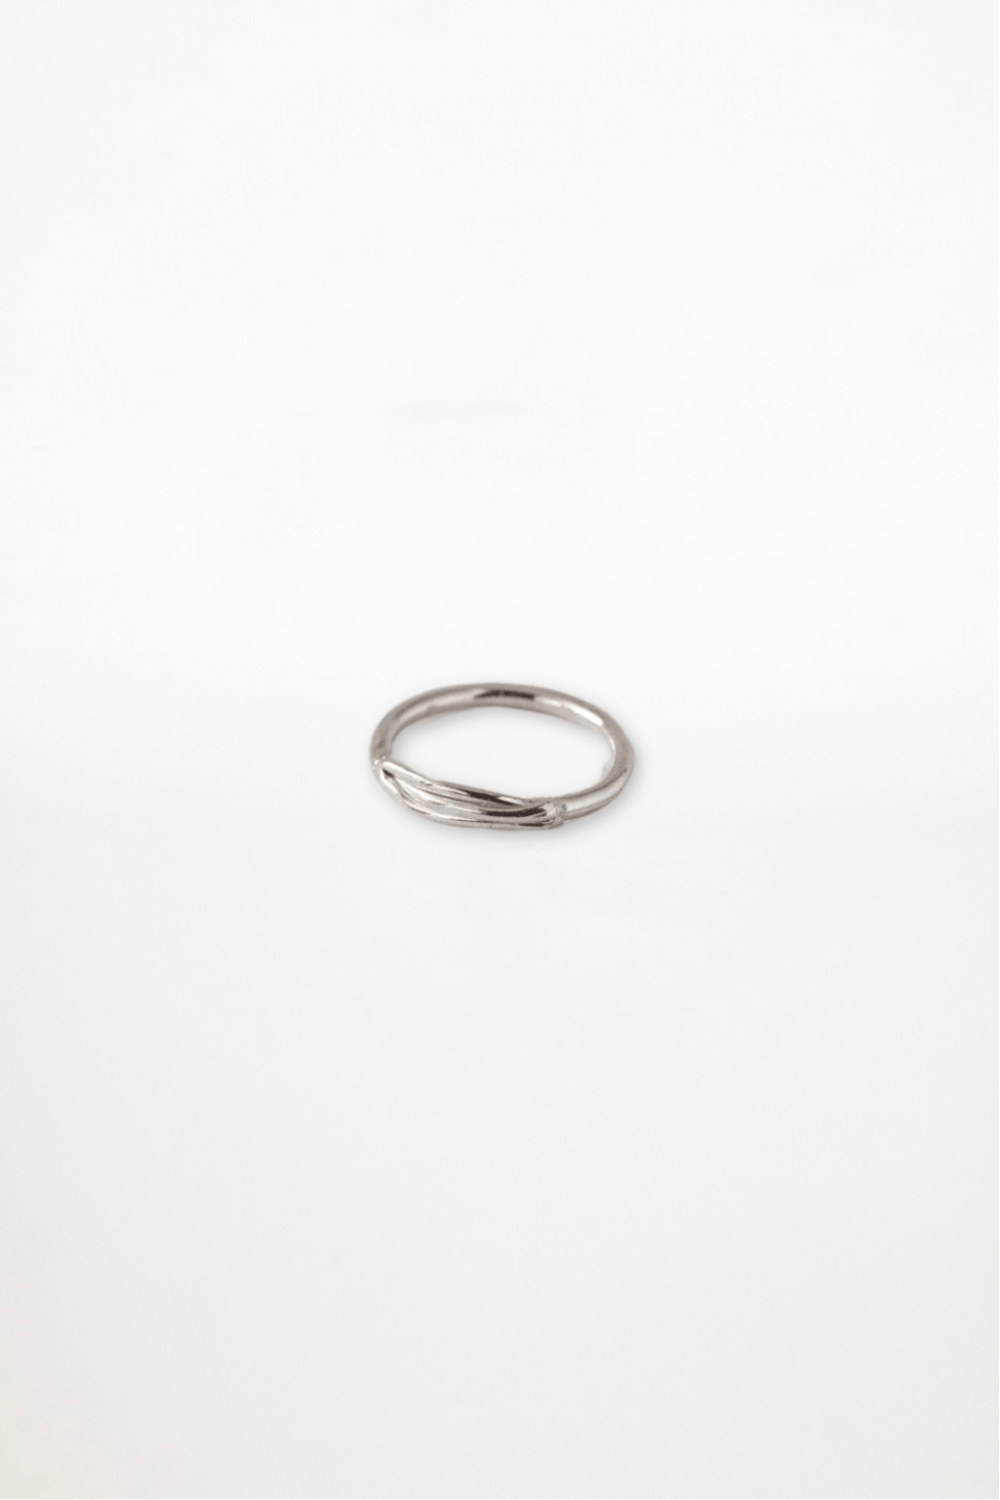 Lilly Buttrose - Wax Ring - Sterling Silver - Ensemble Studios